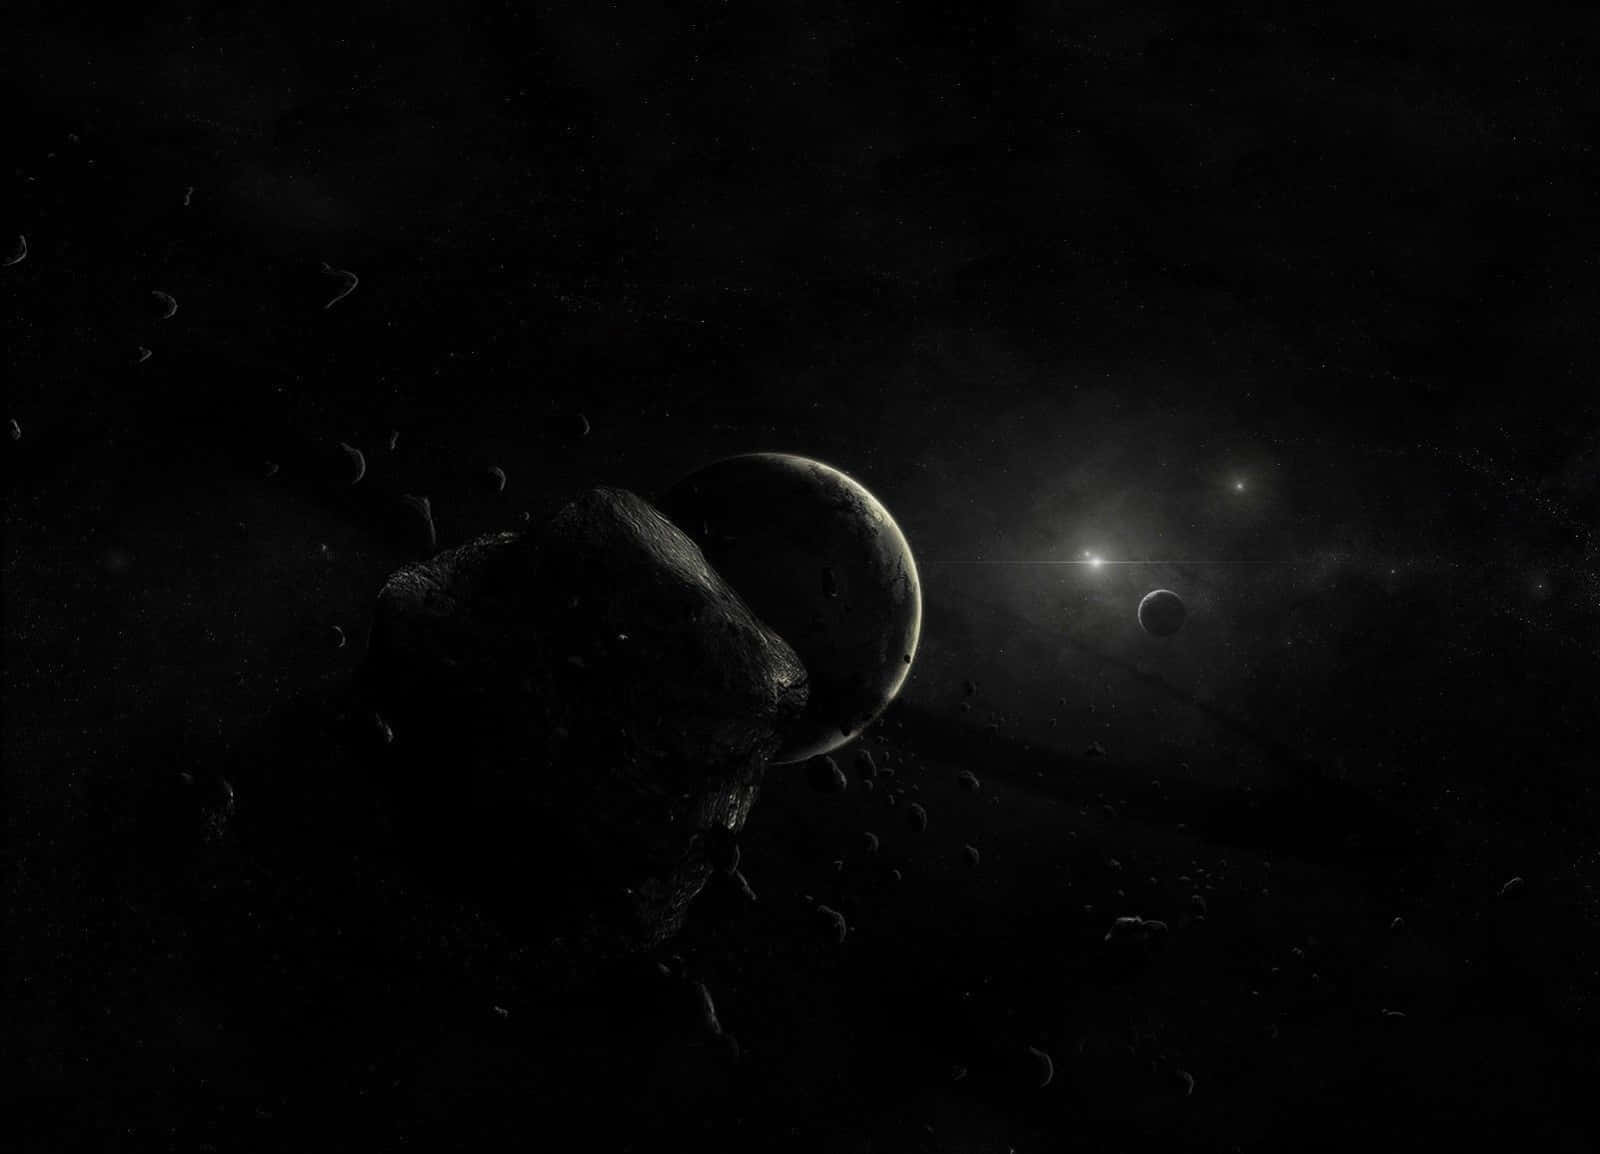 Immerse Yourself in the Spectacular Dark Space Wallpaper